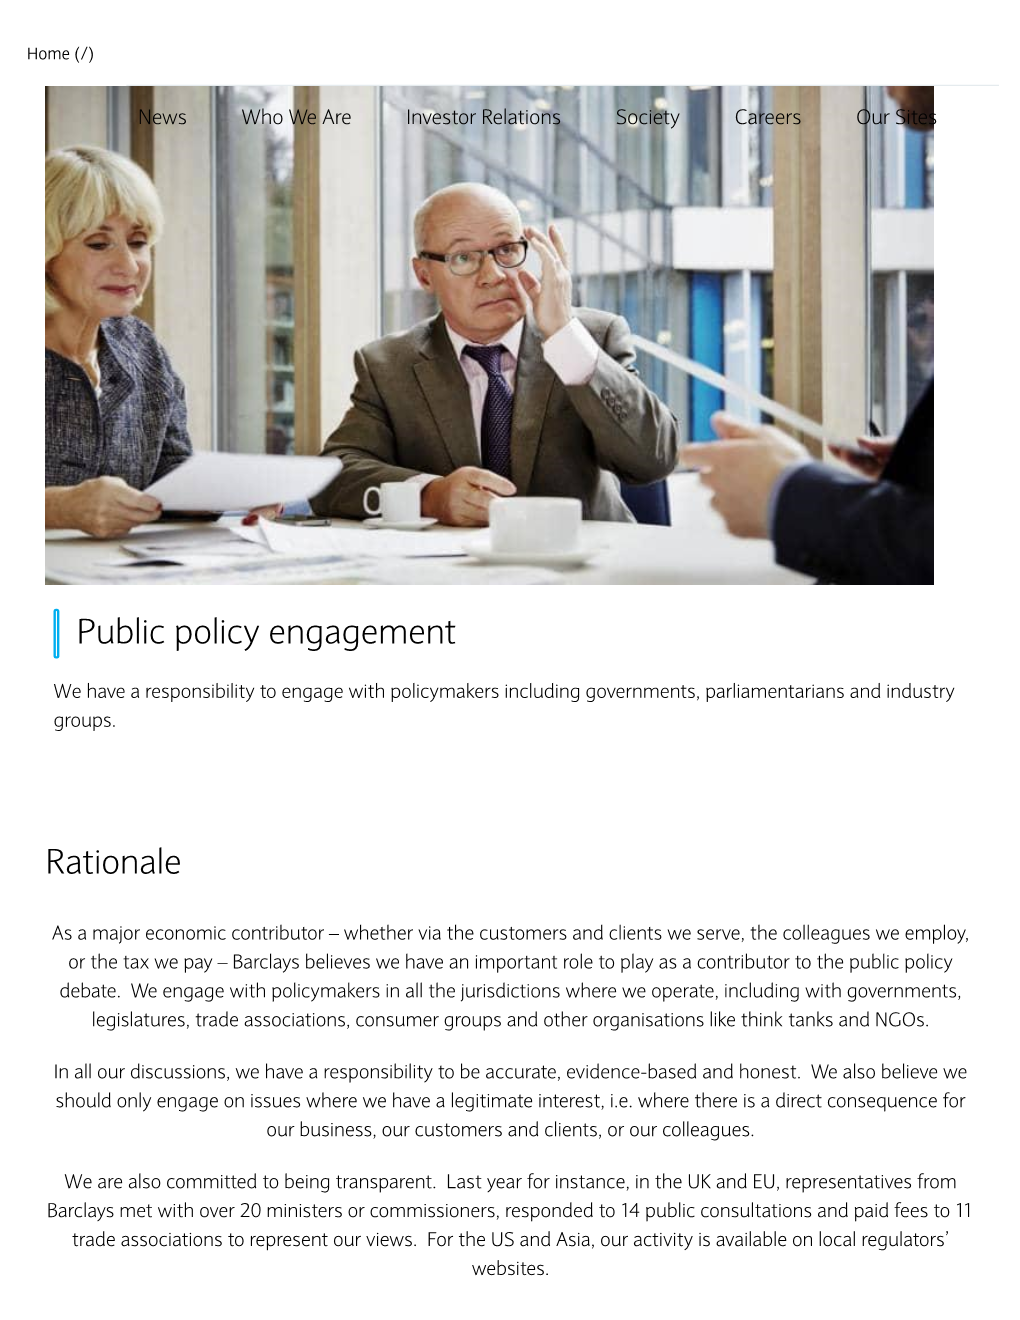 Public Policy Engagement Rationale